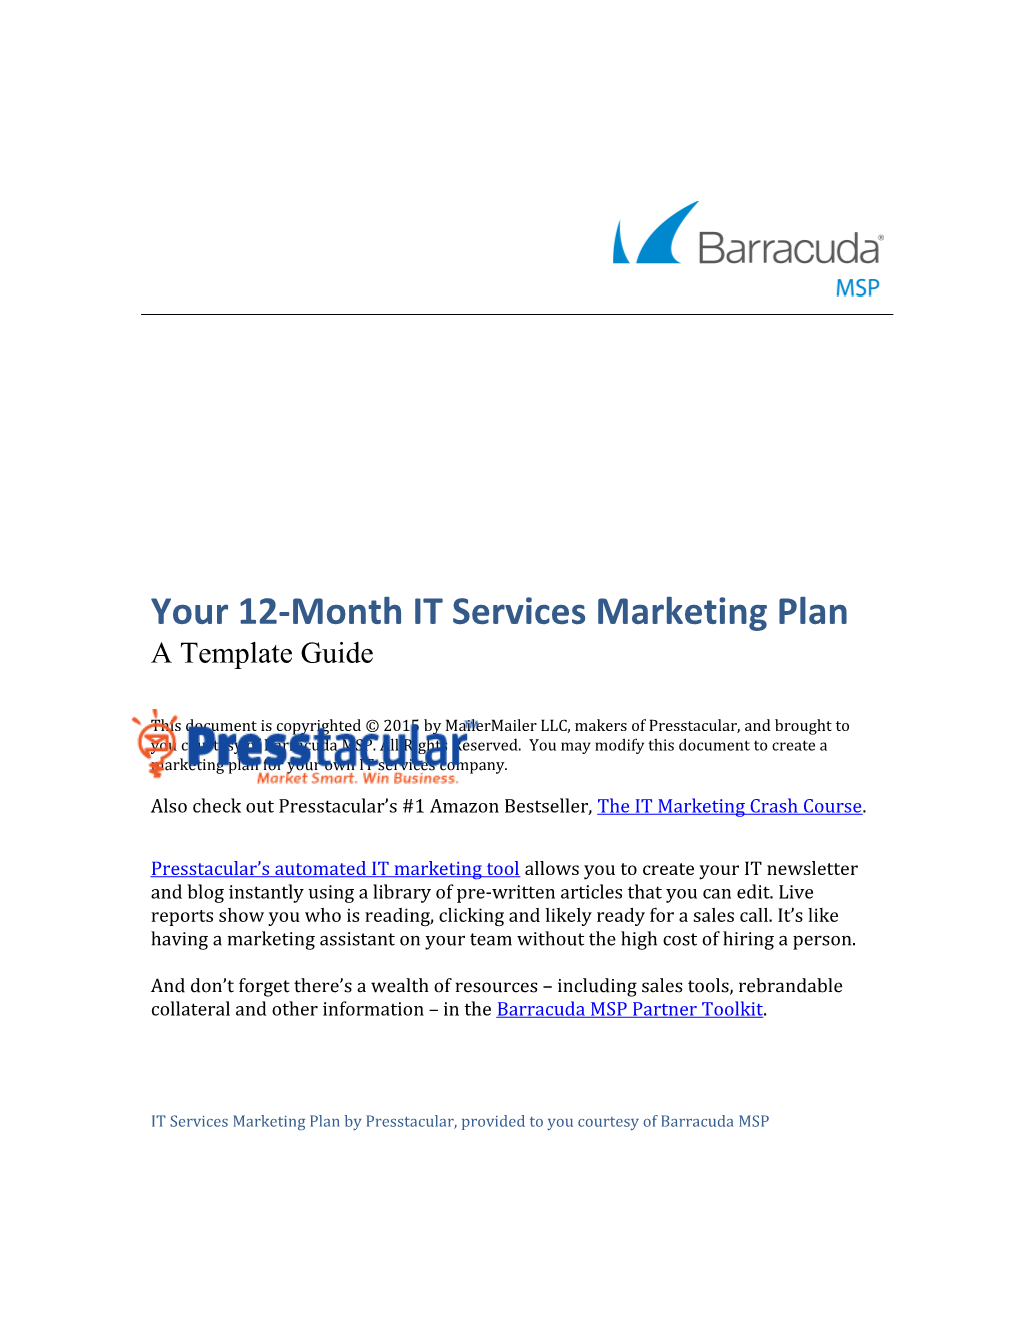 Your 12-Month IT Services Marketing Plan